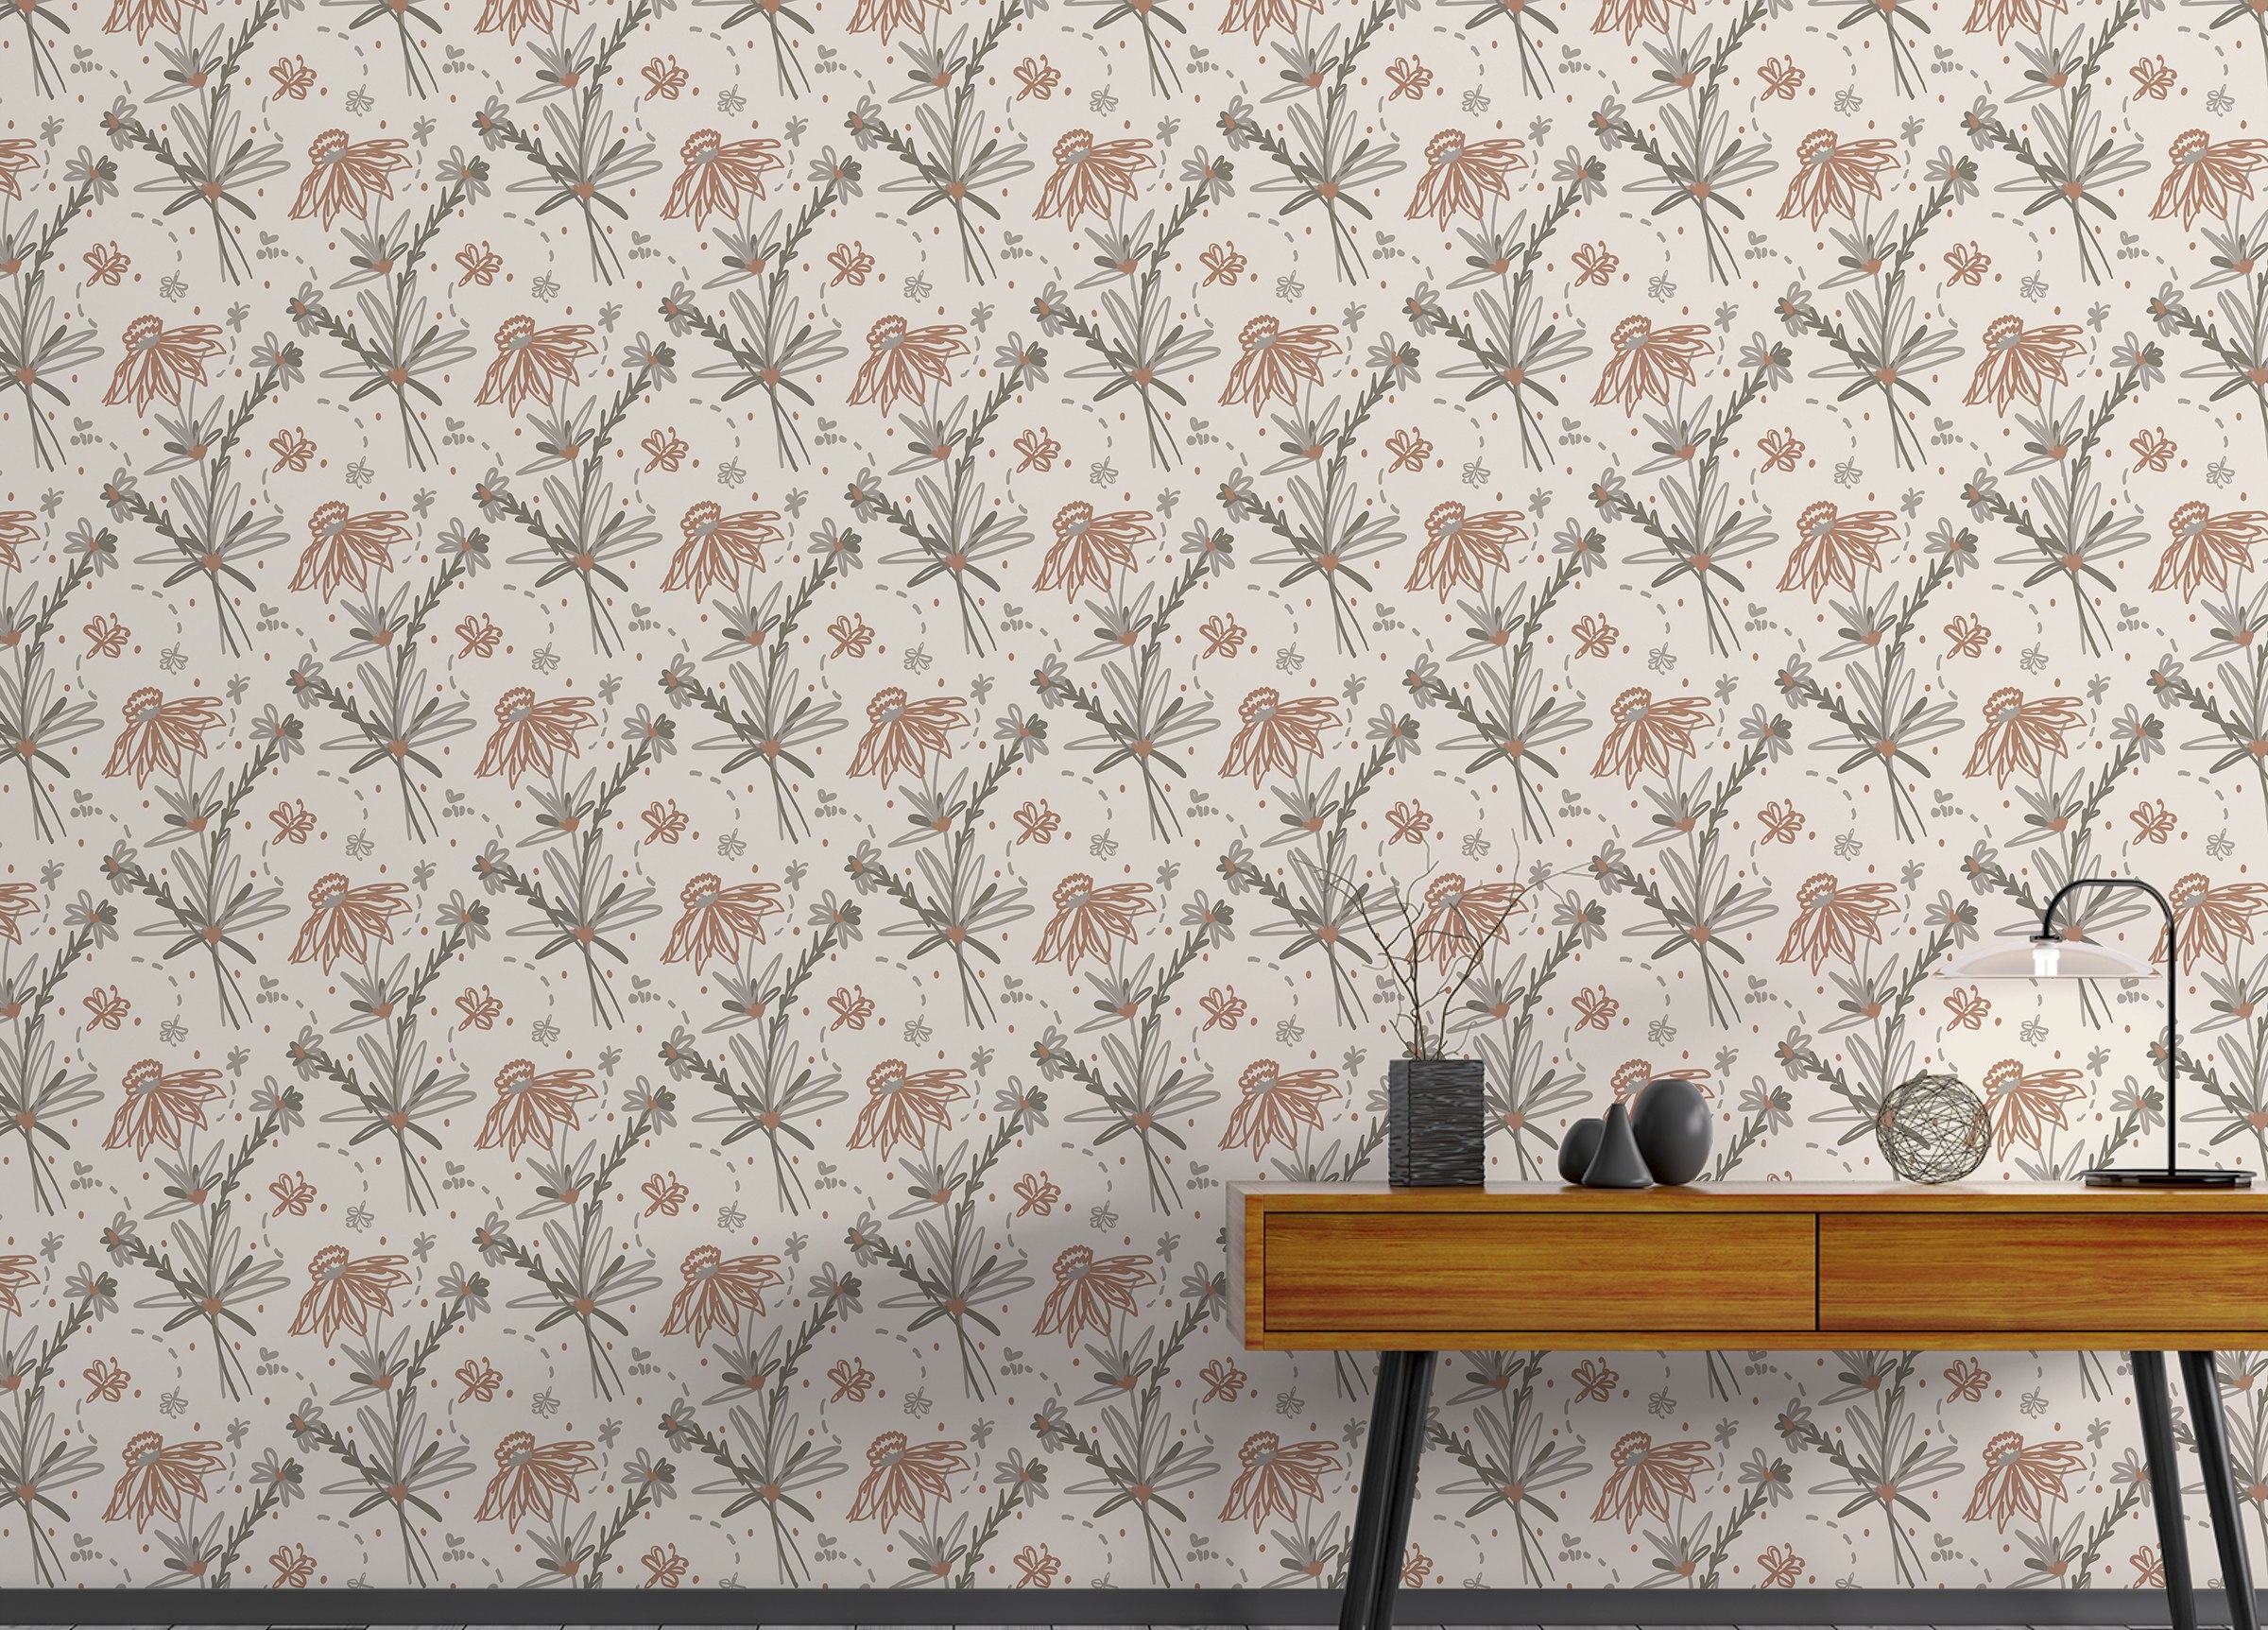 Peel and Stick Earthy Tone Color Doodle Floral Repeat Pattern Boho Wallpaper